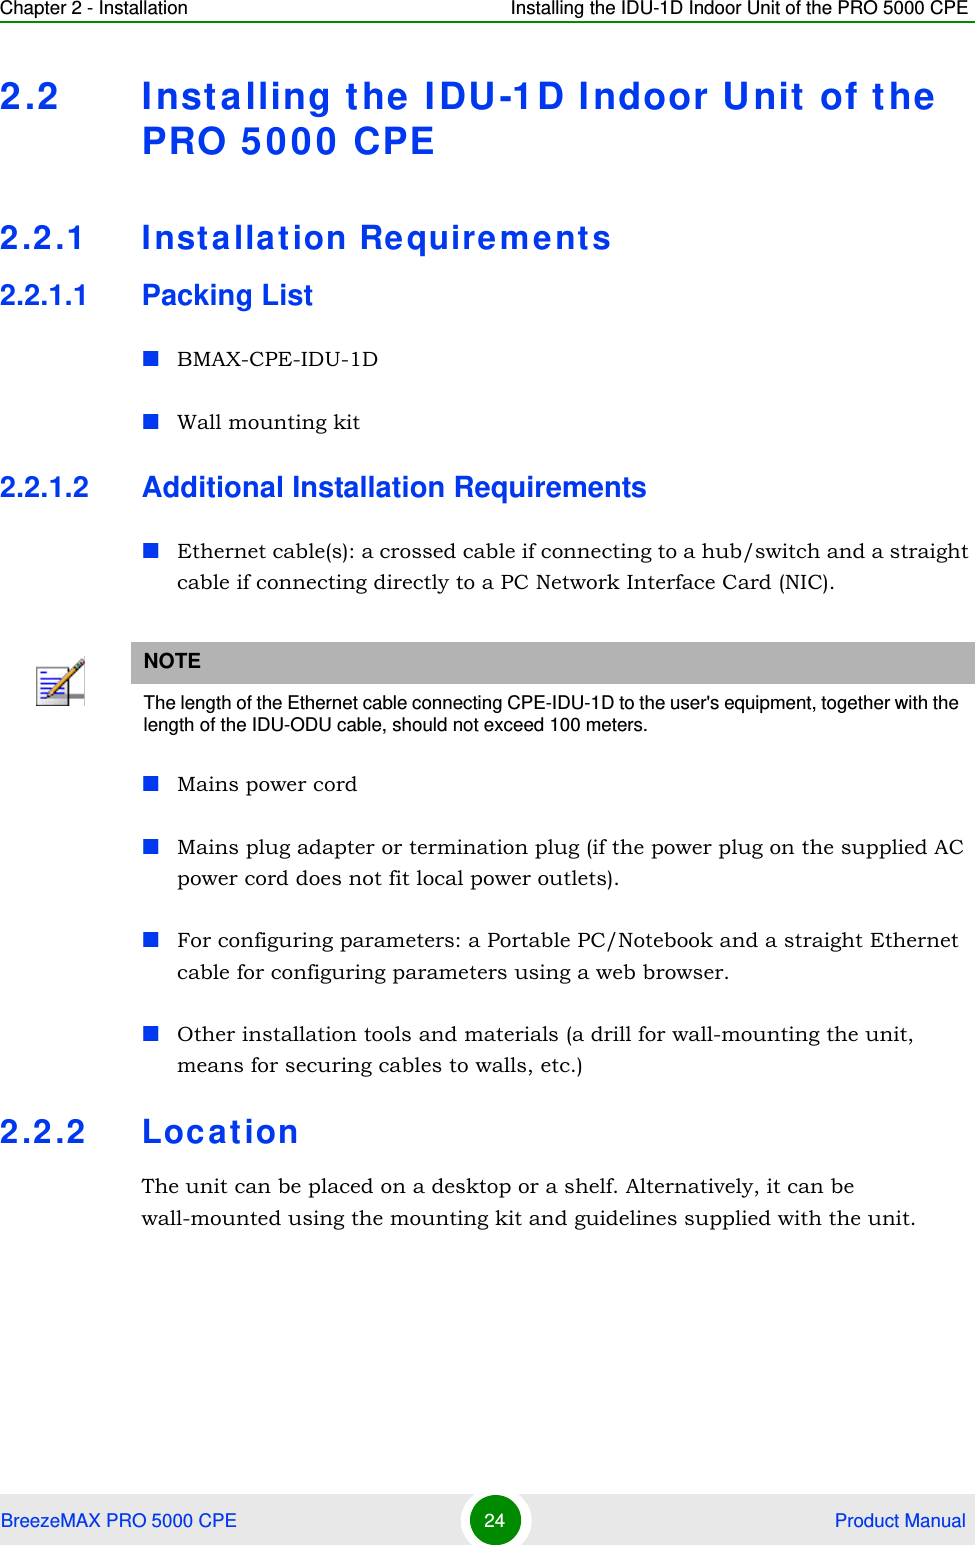 Chapter 2 - Installation Installing the IDU-1D Indoor Unit of the PRO 5000 CPEBreezeMAX PRO 5000 CPE 24  Product Manual2.2 Installing the IDU-1D Indoor Unit of the PRO 5000 CPE2.2.1 Installation Requirements2.2.1.1 Packing ListBMAX-CPE-IDU-1D Wall mounting kit 2.2.1.2 Additional Installation RequirementsEthernet cable(s): a crossed cable if connecting to a hub/switch and a straight cable if connecting directly to a PC Network Interface Card (NIC).Mains power cordMains plug adapter or termination plug (if the power plug on the supplied AC power cord does not fit local power outlets).For configuring parameters: a Portable PC/Notebook and a straight Ethernet cable for configuring parameters using a web browser.Other installation tools and materials (a drill for wall-mounting the unit, means for securing cables to walls, etc.)2.2.2 LocationThe unit can be placed on a desktop or a shelf. Alternatively, it can be wall-mounted using the mounting kit and guidelines supplied with the unit.NOTEThe length of the Ethernet cable connecting CPE-IDU-1D to the user&apos;s equipment, together with the length of the IDU-ODU cable, should not exceed 100 meters.